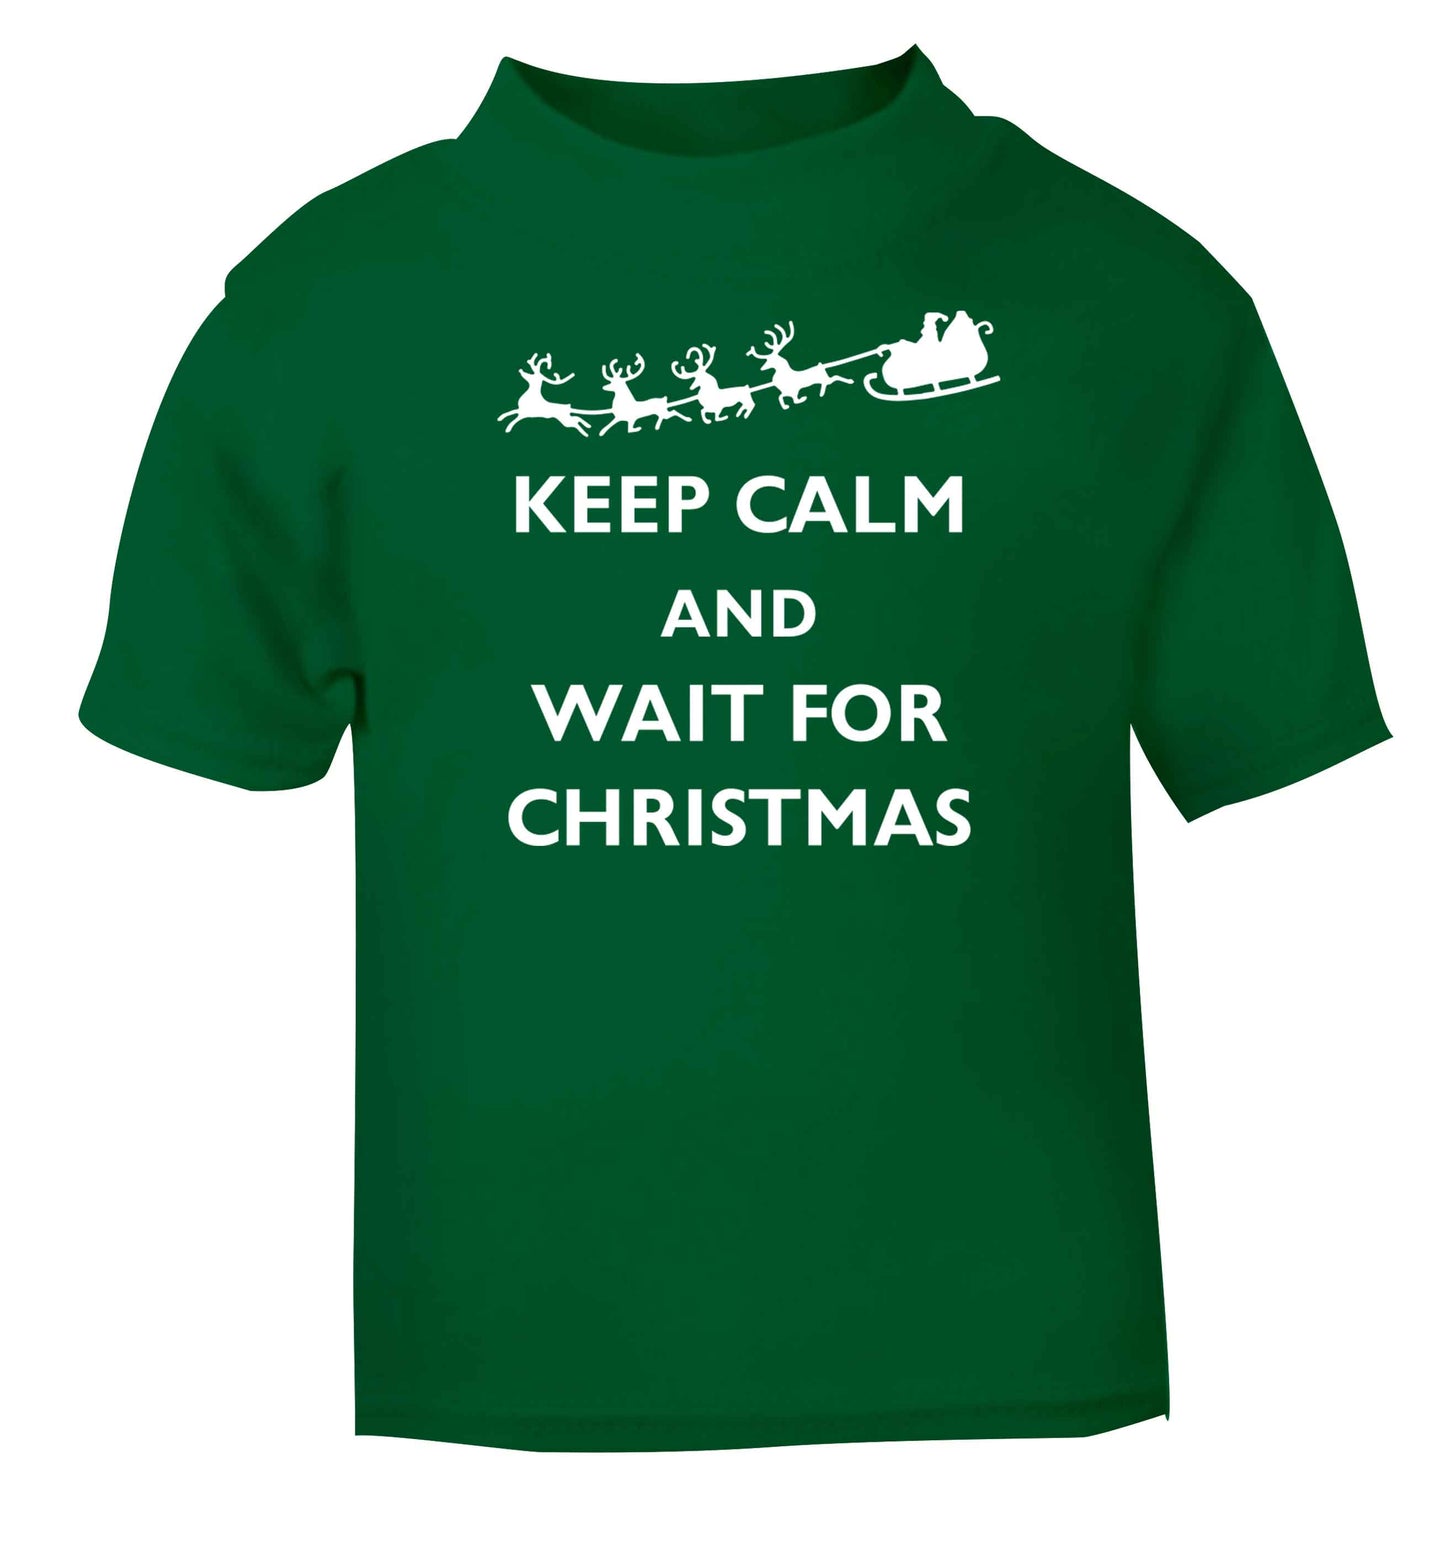 Keep calm and wait for Christmas green baby toddler Tshirt 2 Years